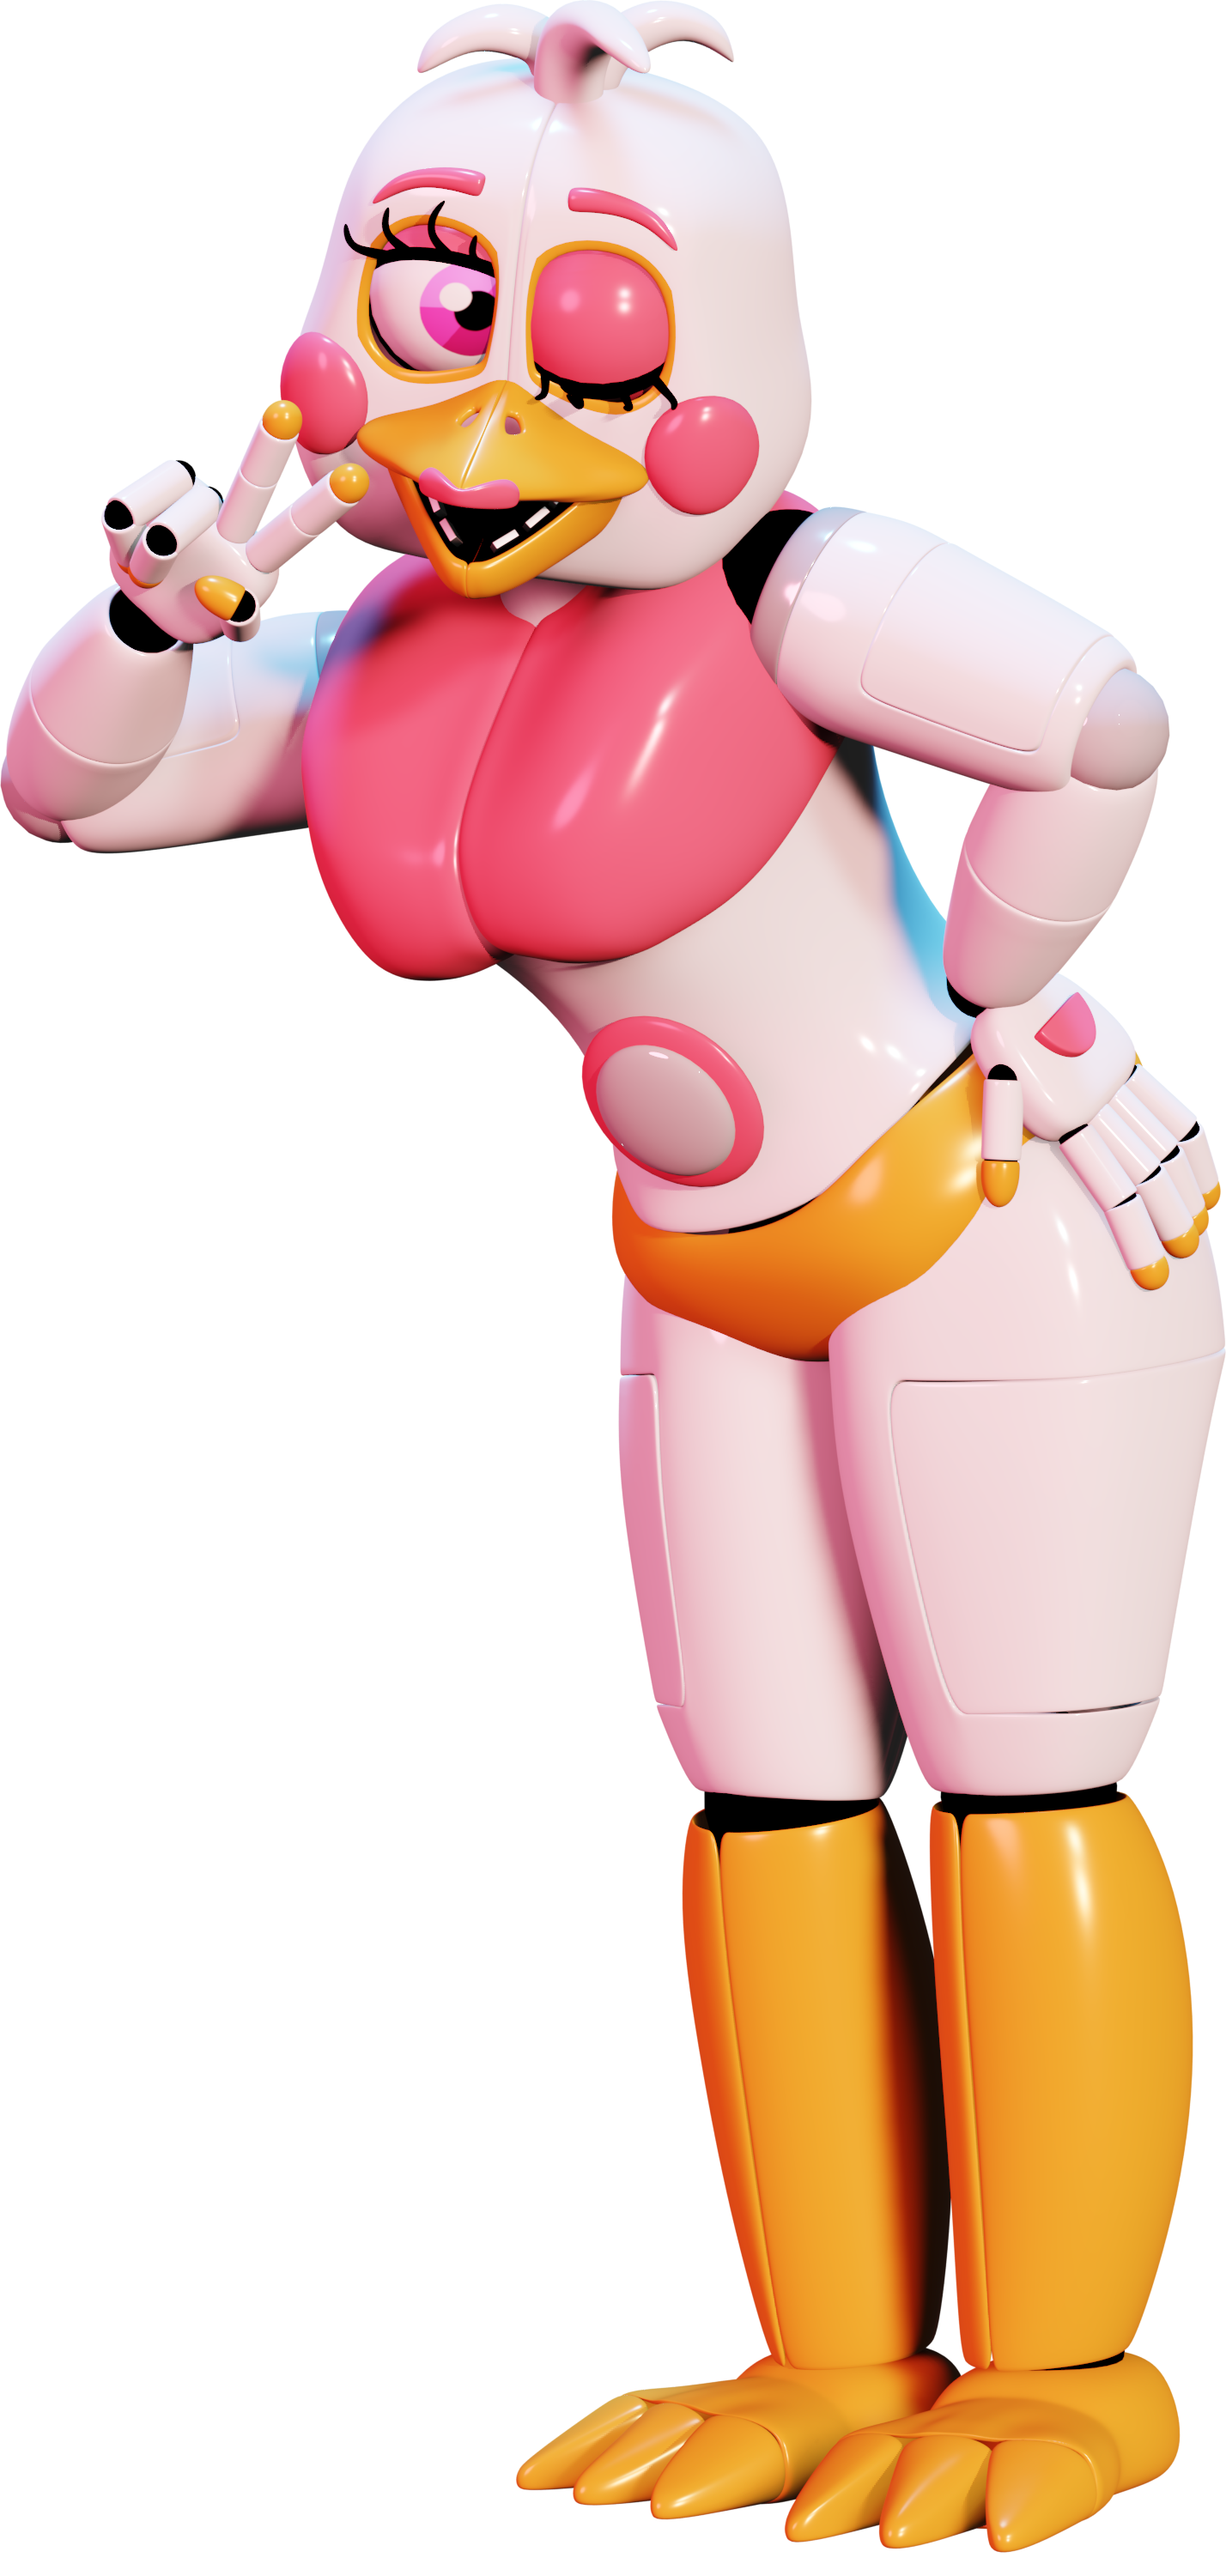 Funtime chica( model by me) : r/fivenightsatfreddys